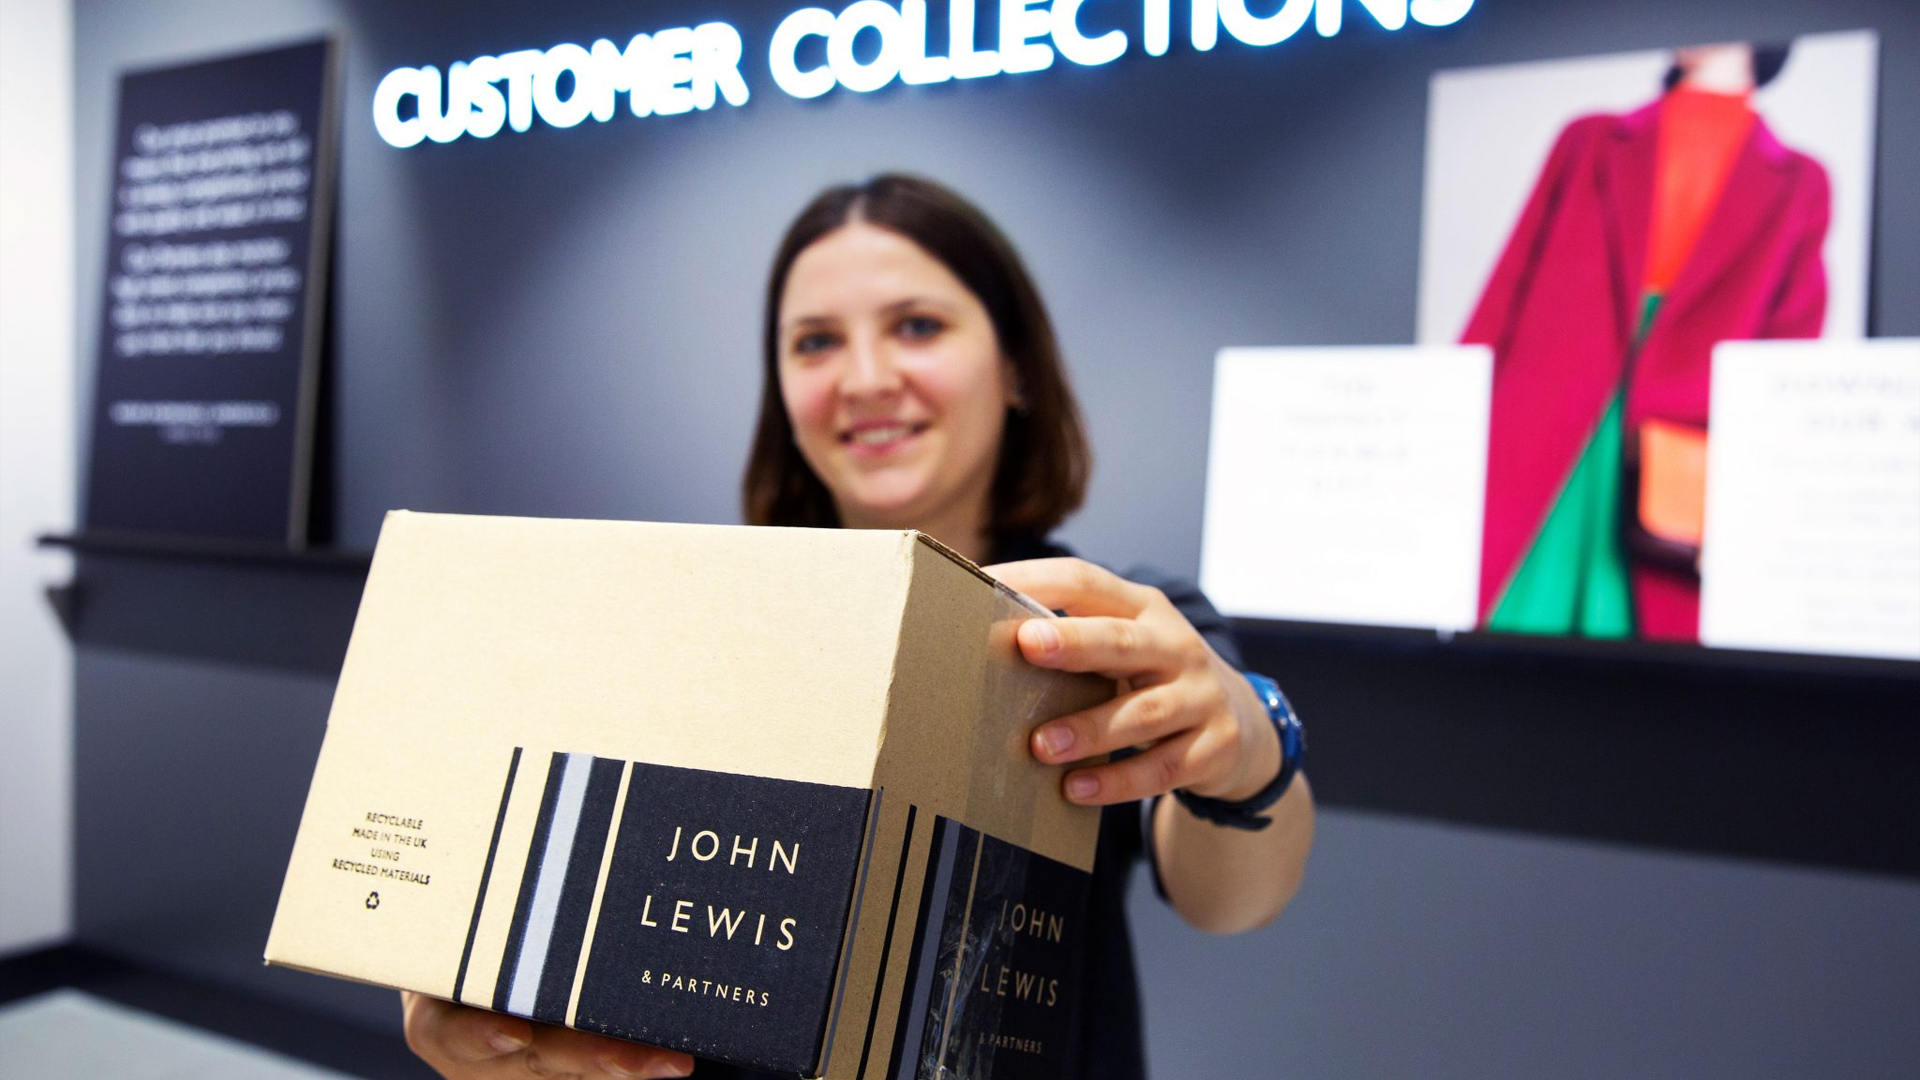 John Lewis customer collection // ParcelHero click & collect story